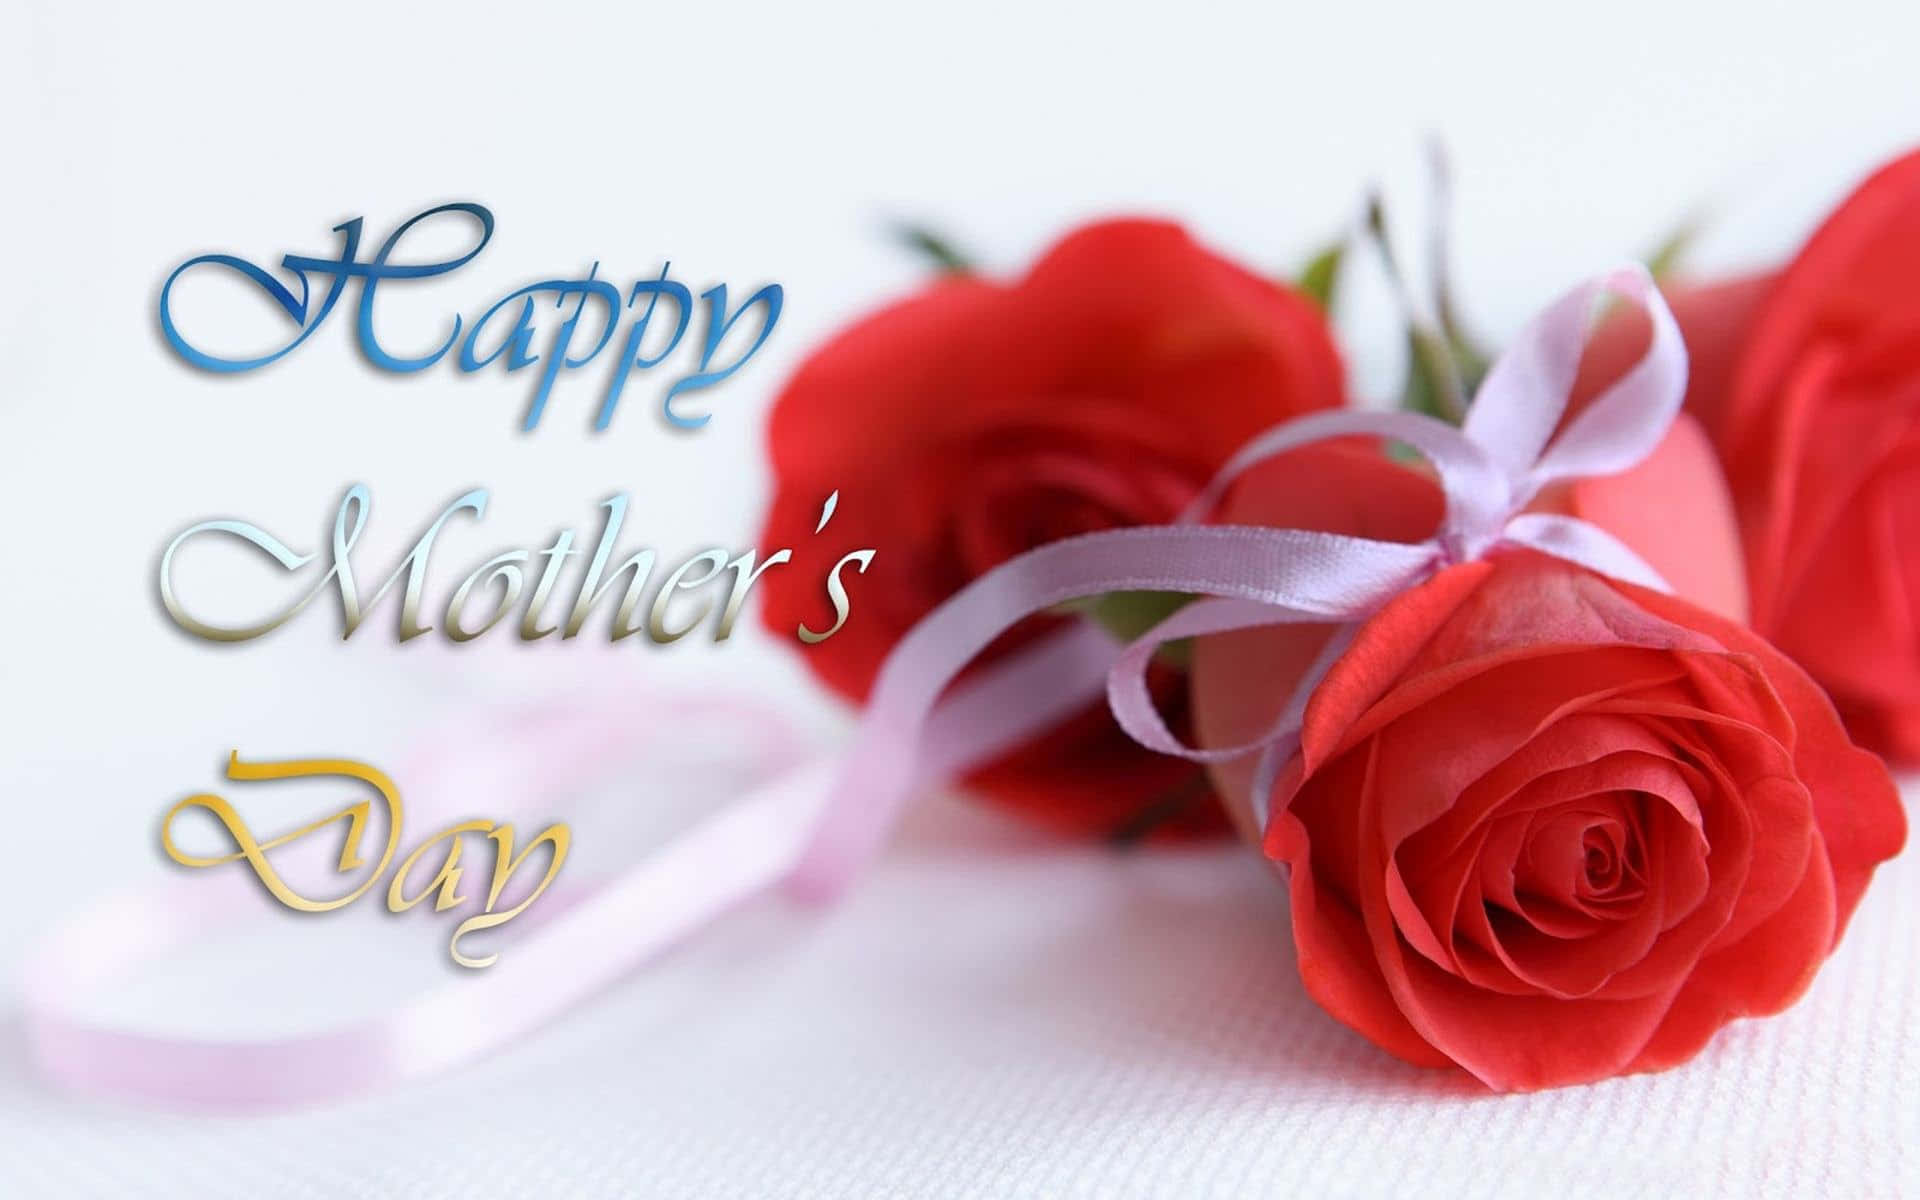 Celebrate this special day with your loving mom